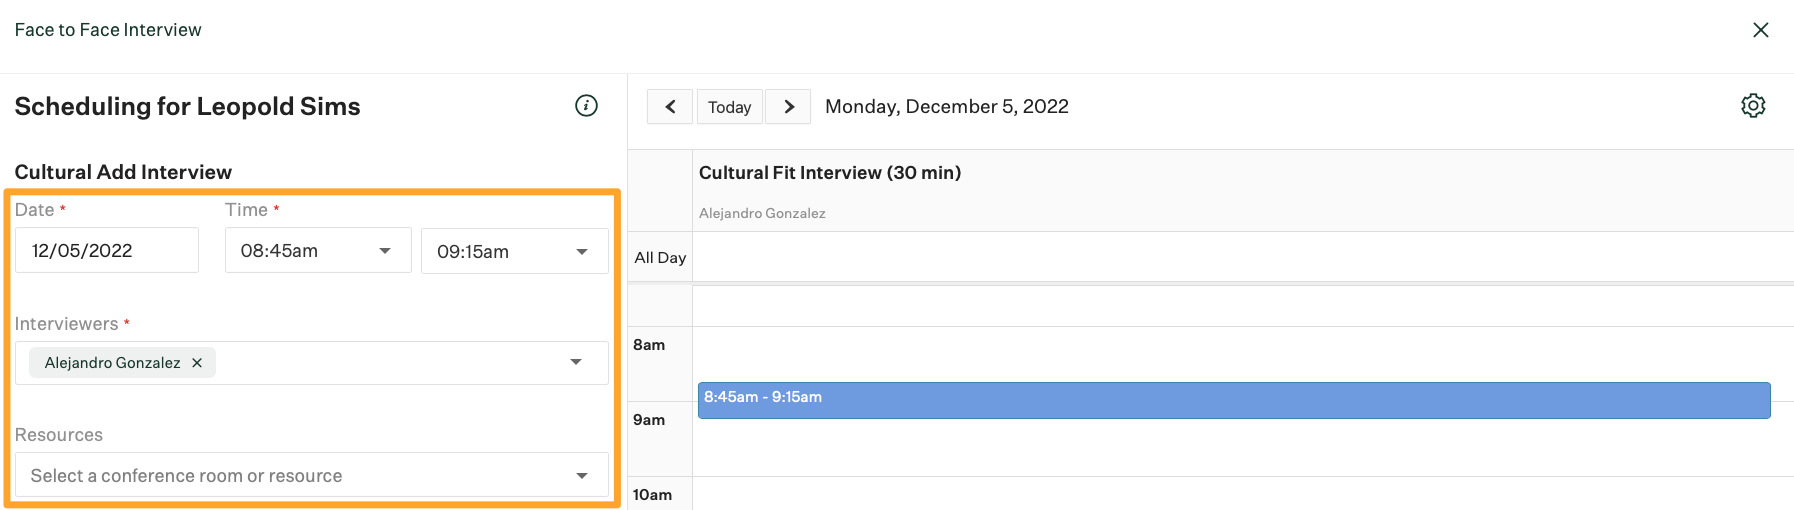 Scheduling page showing a marigold emphasis box around date and interviewer selection with date set to 12 05 22 and interviewer set to Alejandro Gonzalez